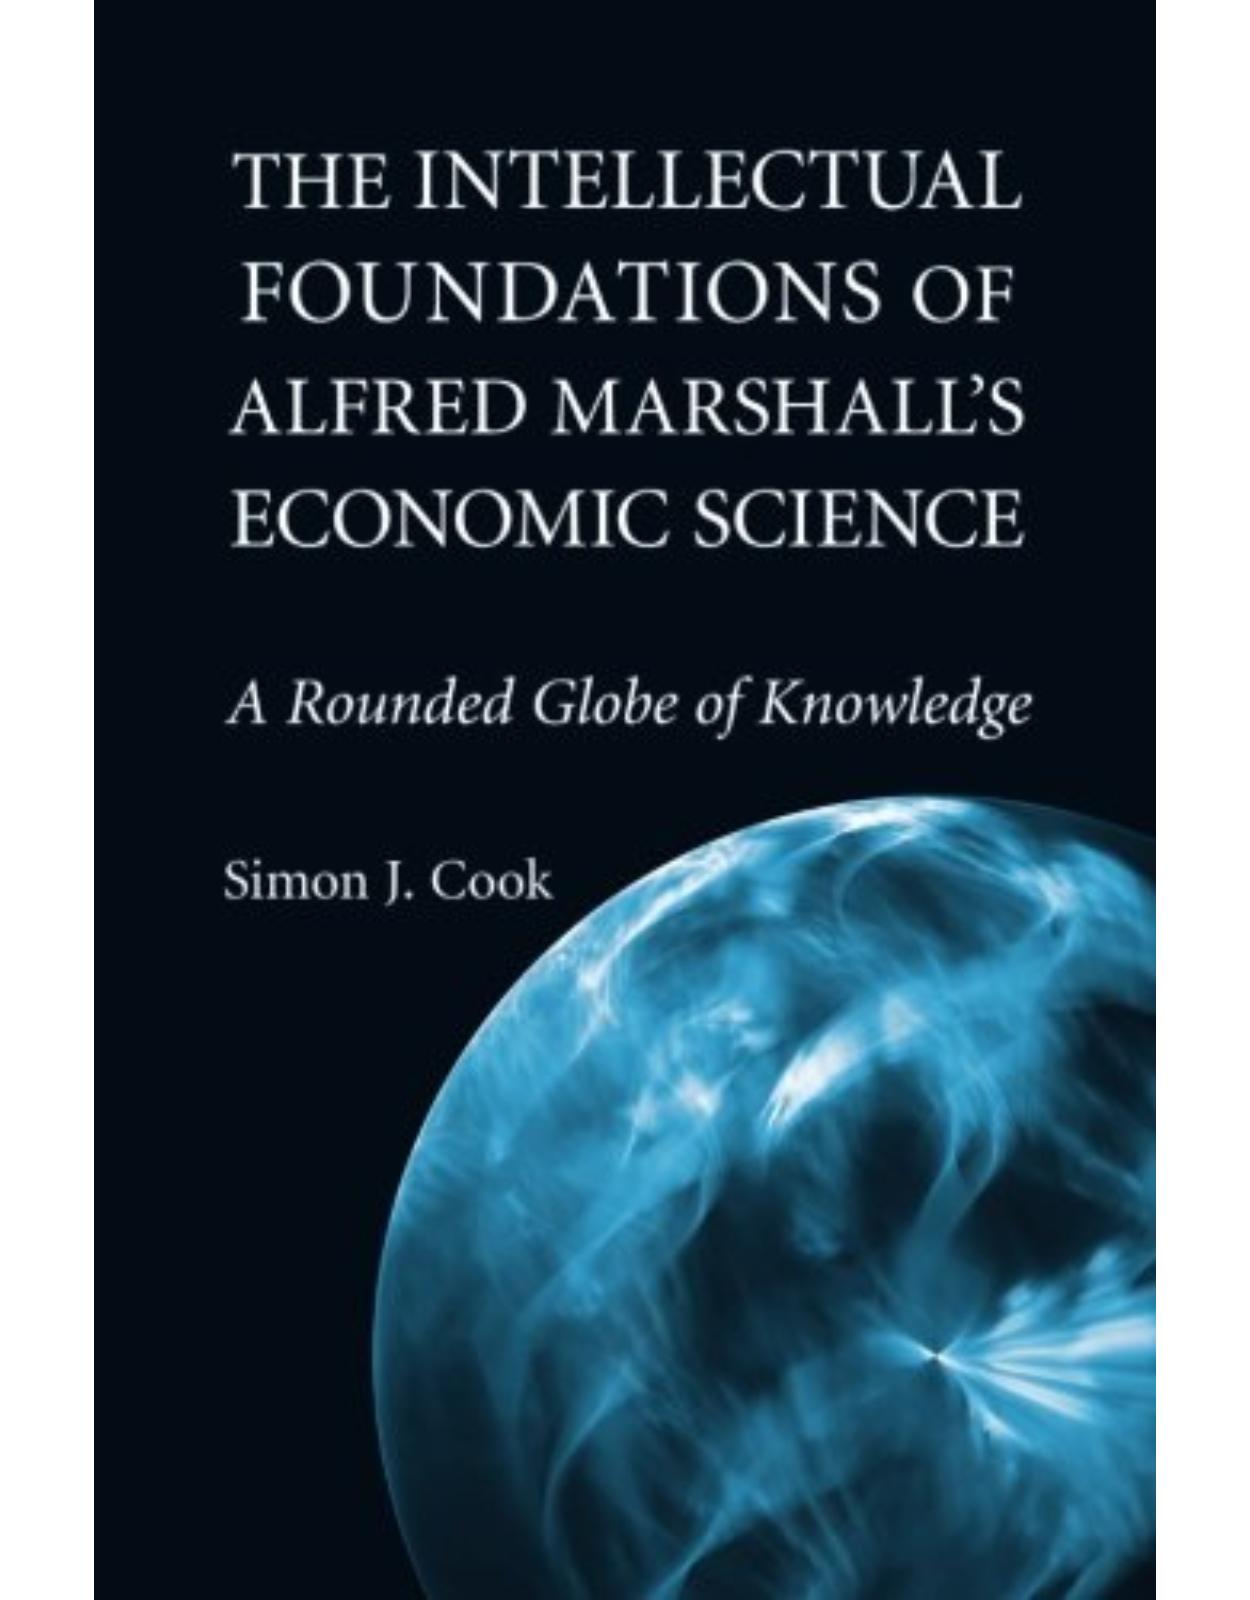 The Intellectual Foundations of Alfred Marshall's Economic Science: A Rounded Globe of Knowledge (Historical Perspectives on Modern Economics)